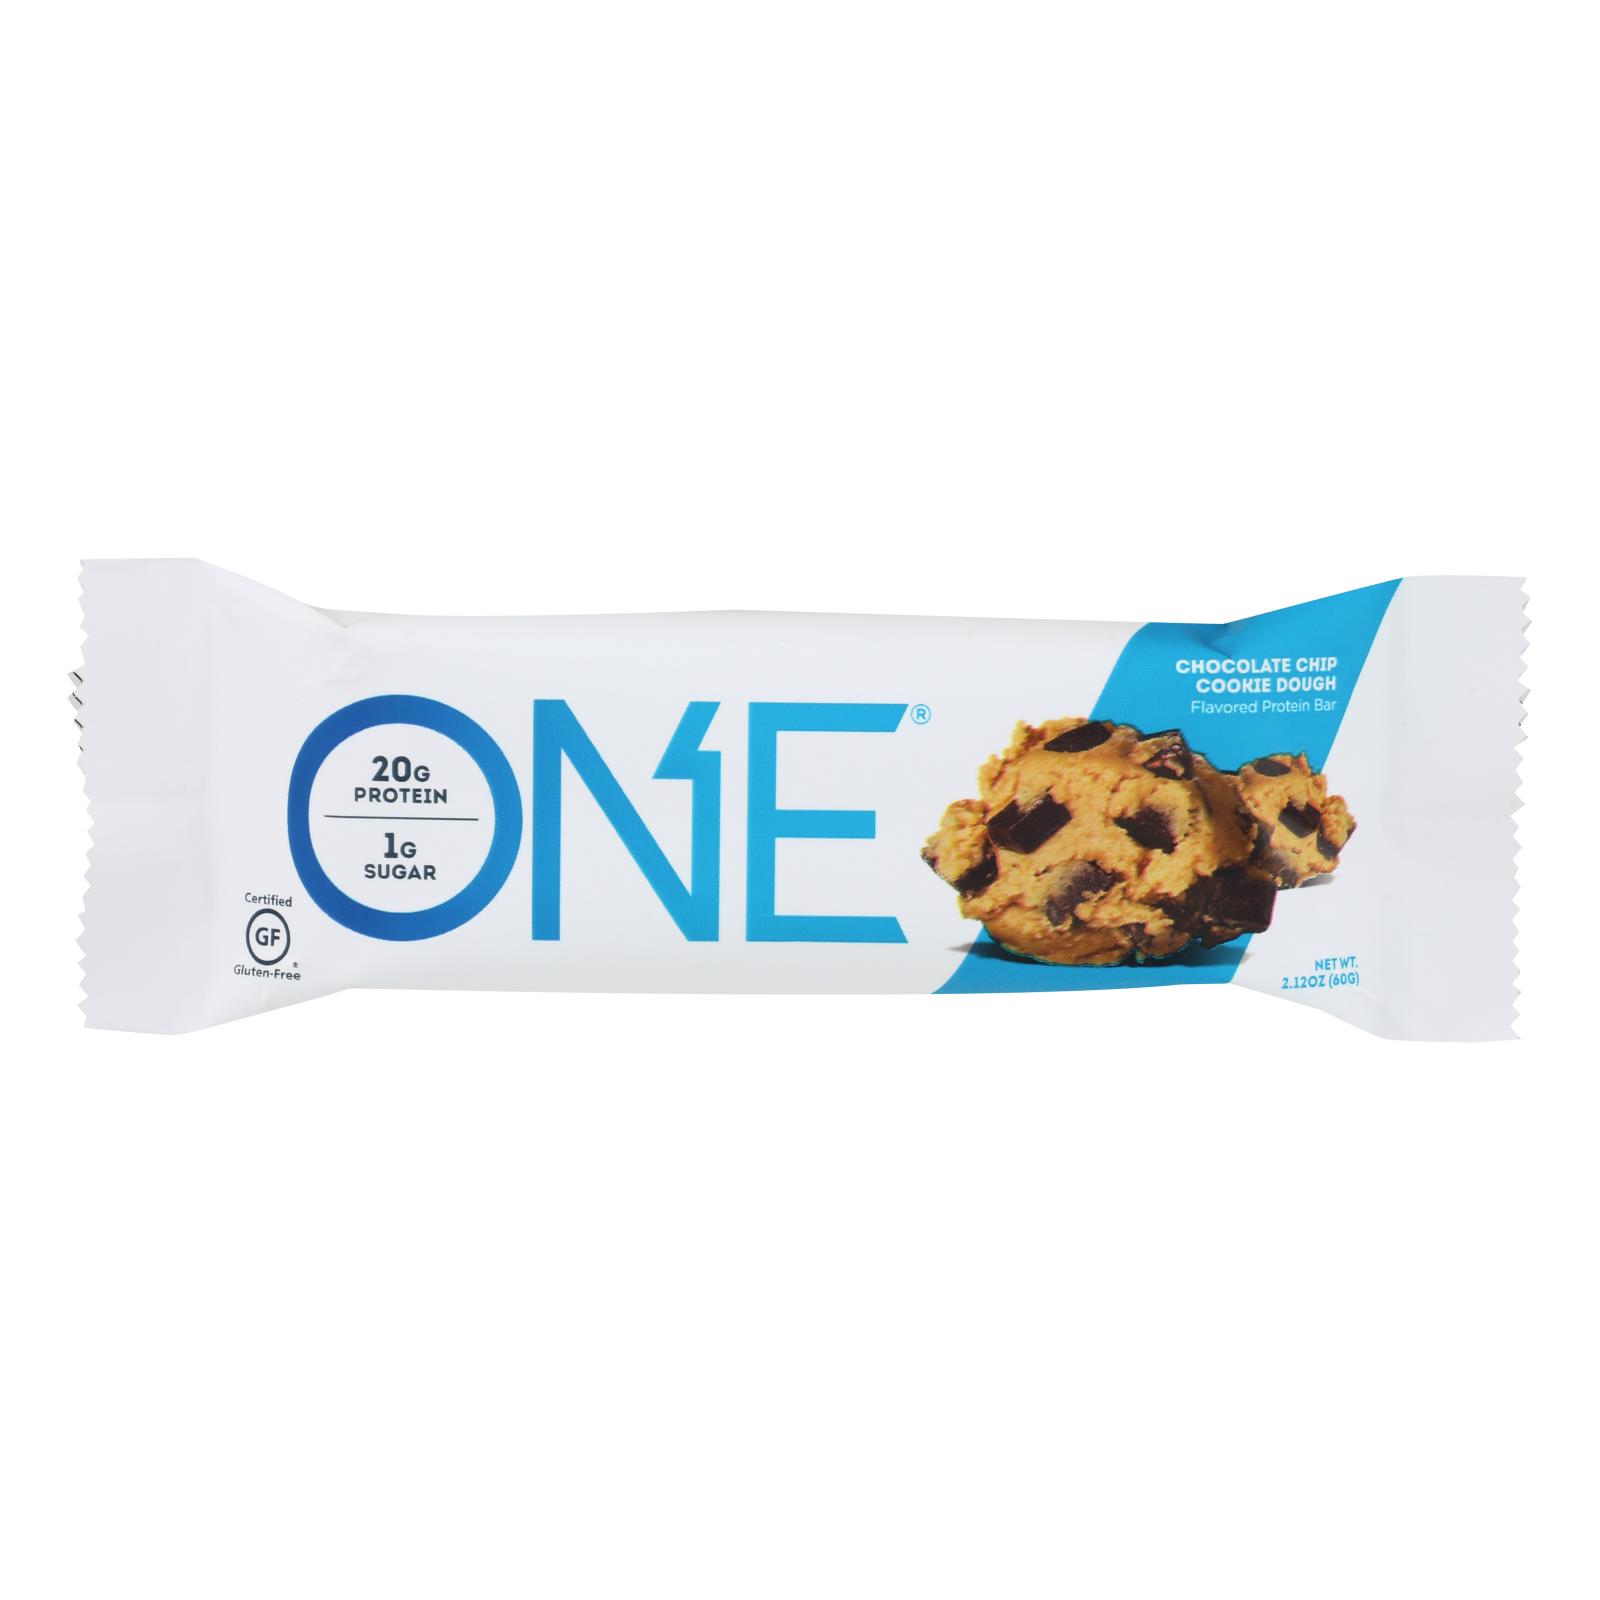 One Chocolate Chip Cookie Dough Flavored Protein Bars - 12개 묶음상품 - 60 GRM